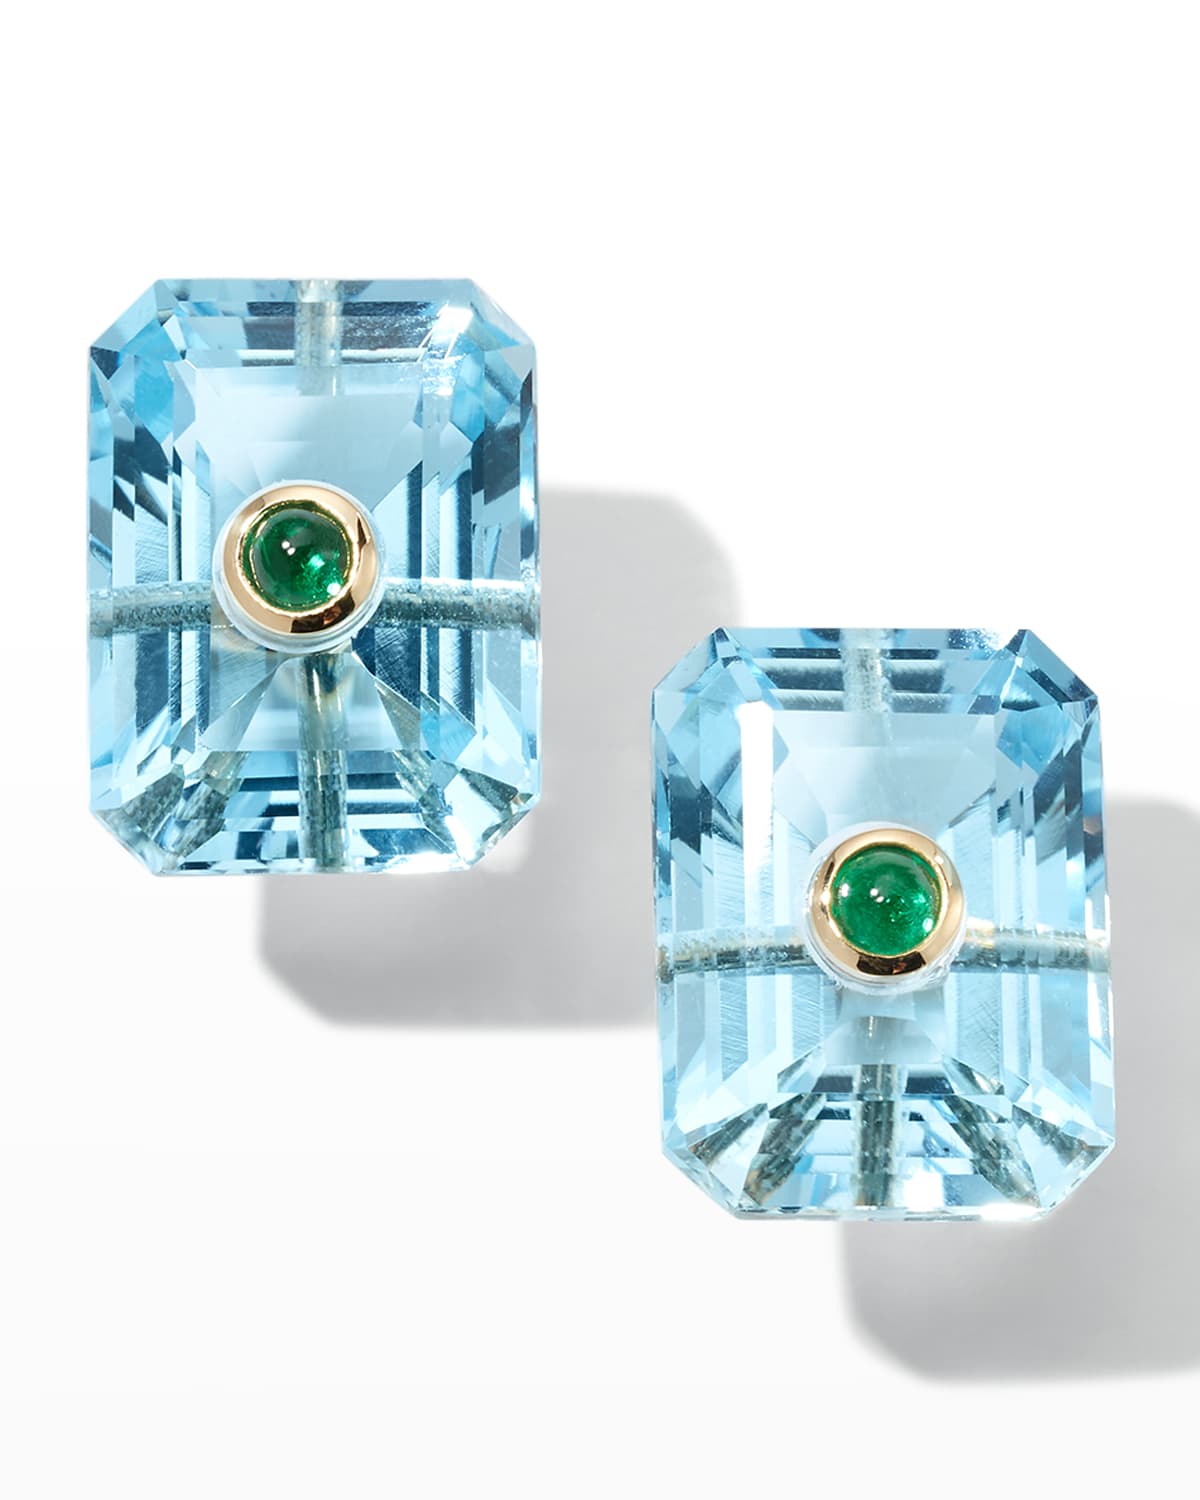 18K Yellow Gold Emerald-Cut 2 Sky Blue Topaz and 2 Round Cabochon Emerald Earrings